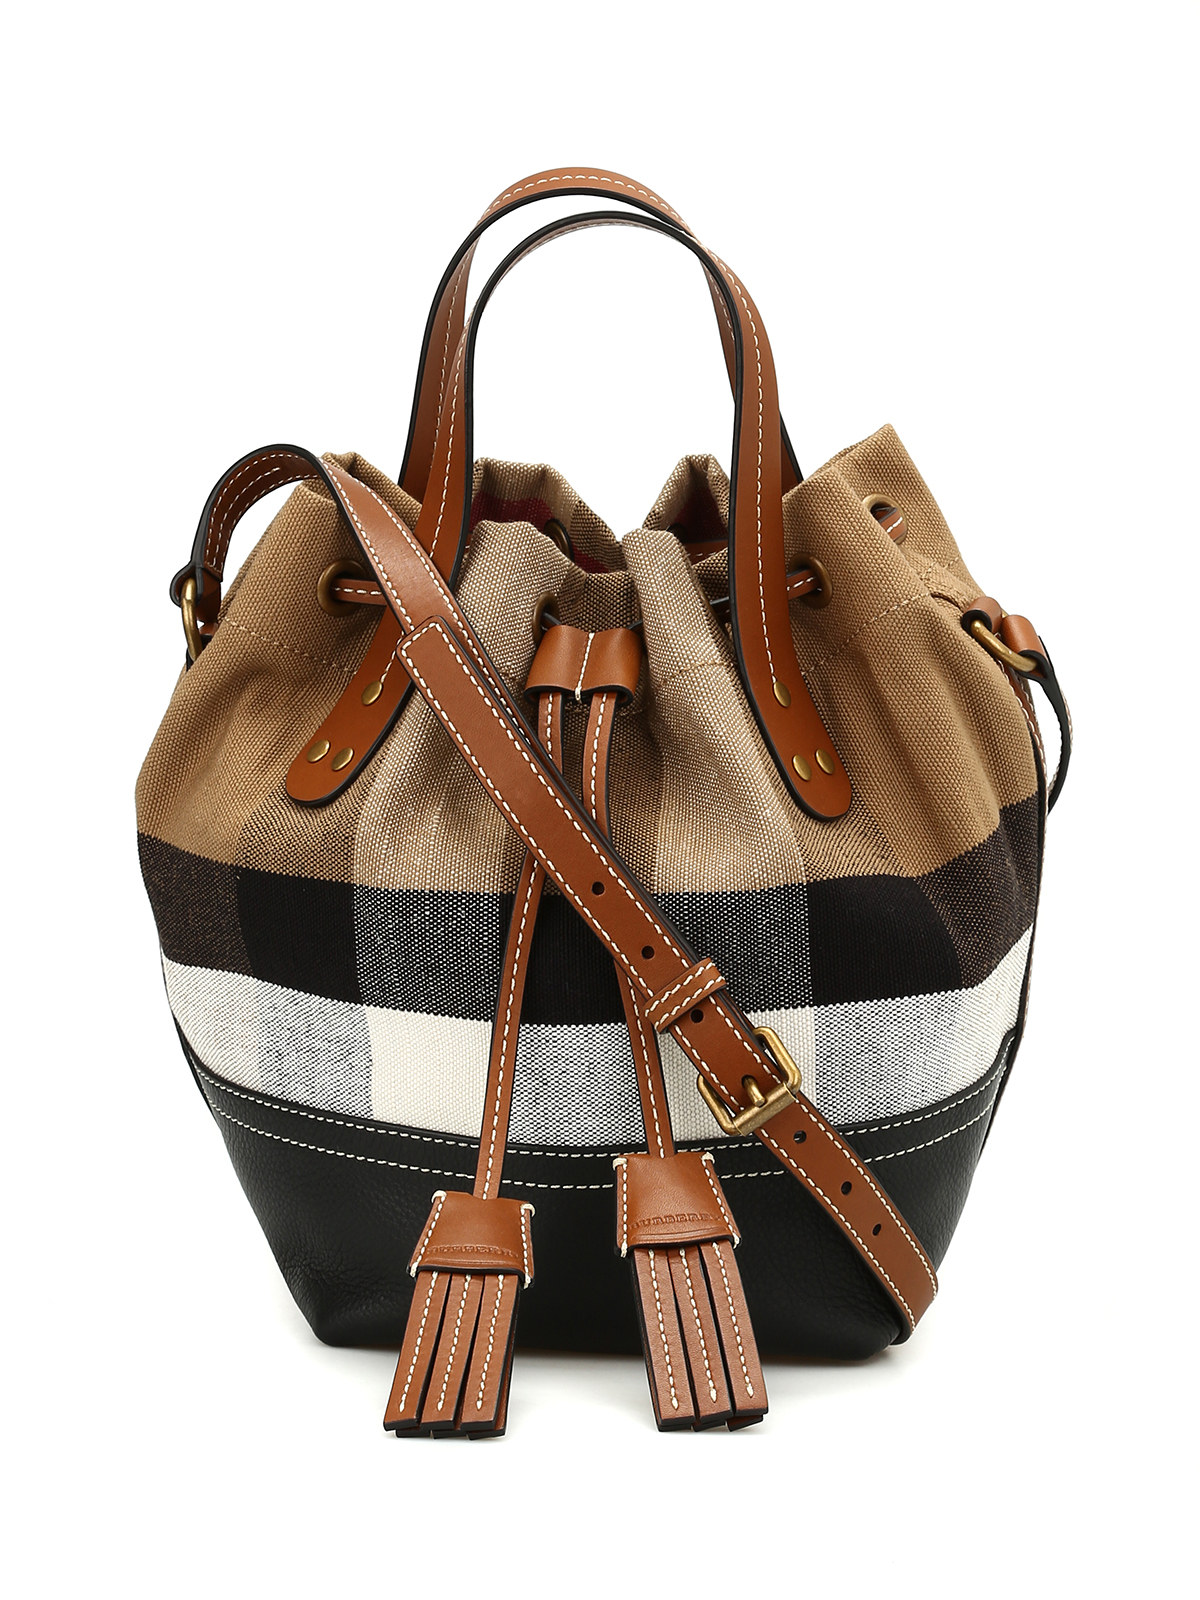 Burberry Medium Canvas Check Bucket Bag | Confederated Tribes of the Umatilla Indian Reservation